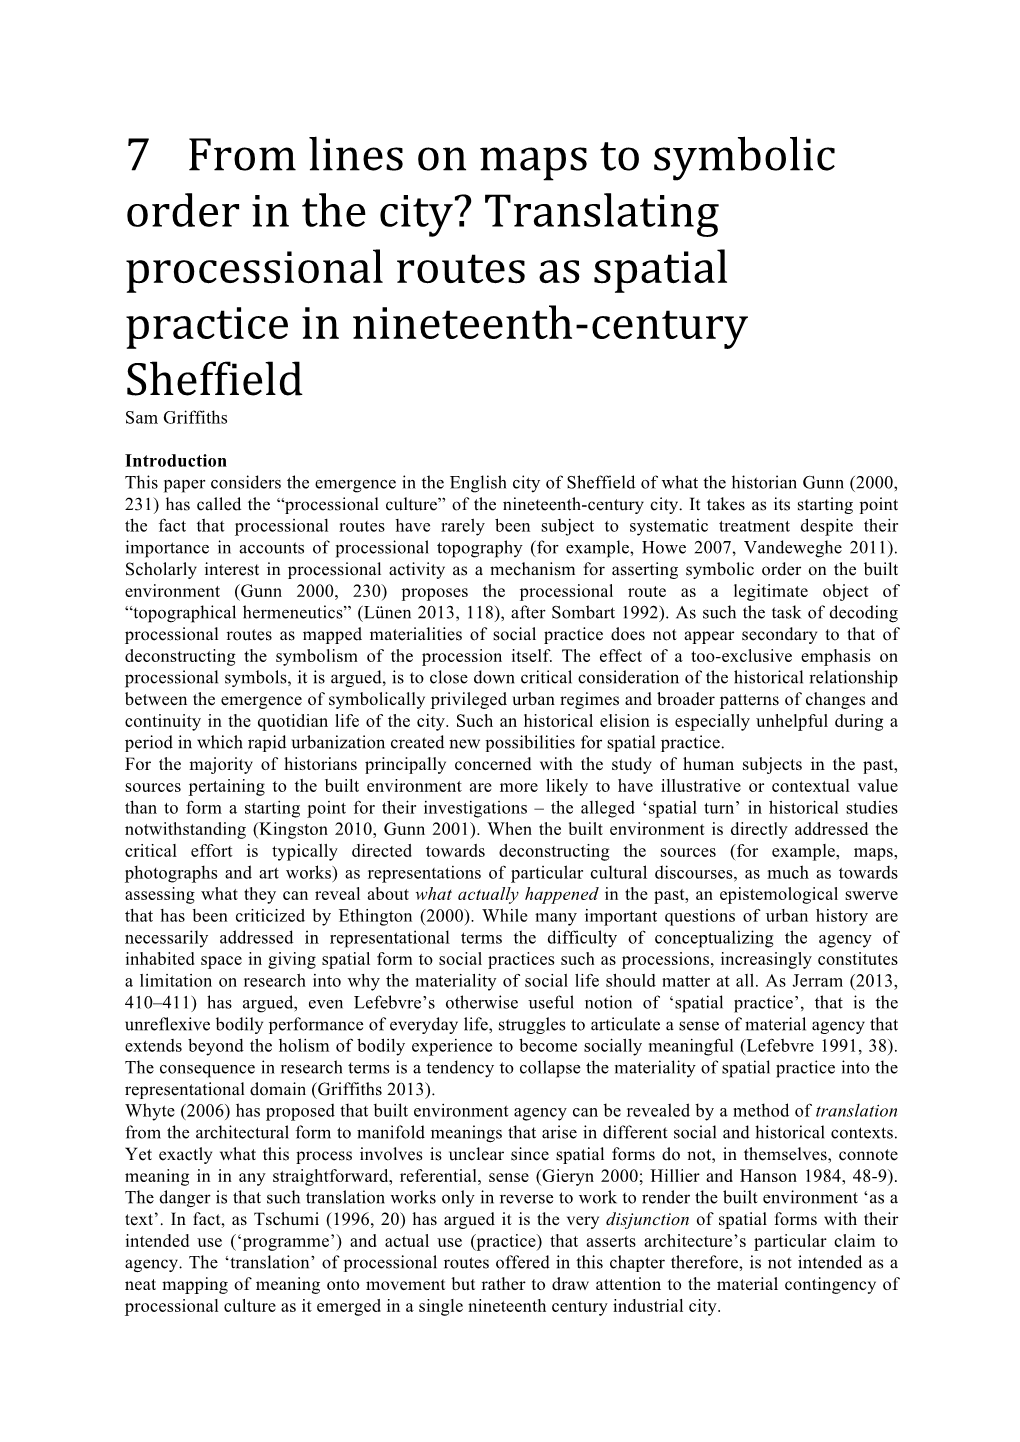 Translating Processional Routes As Spatial Practice in Nineteenth-Century Sheffield Sam Griffiths